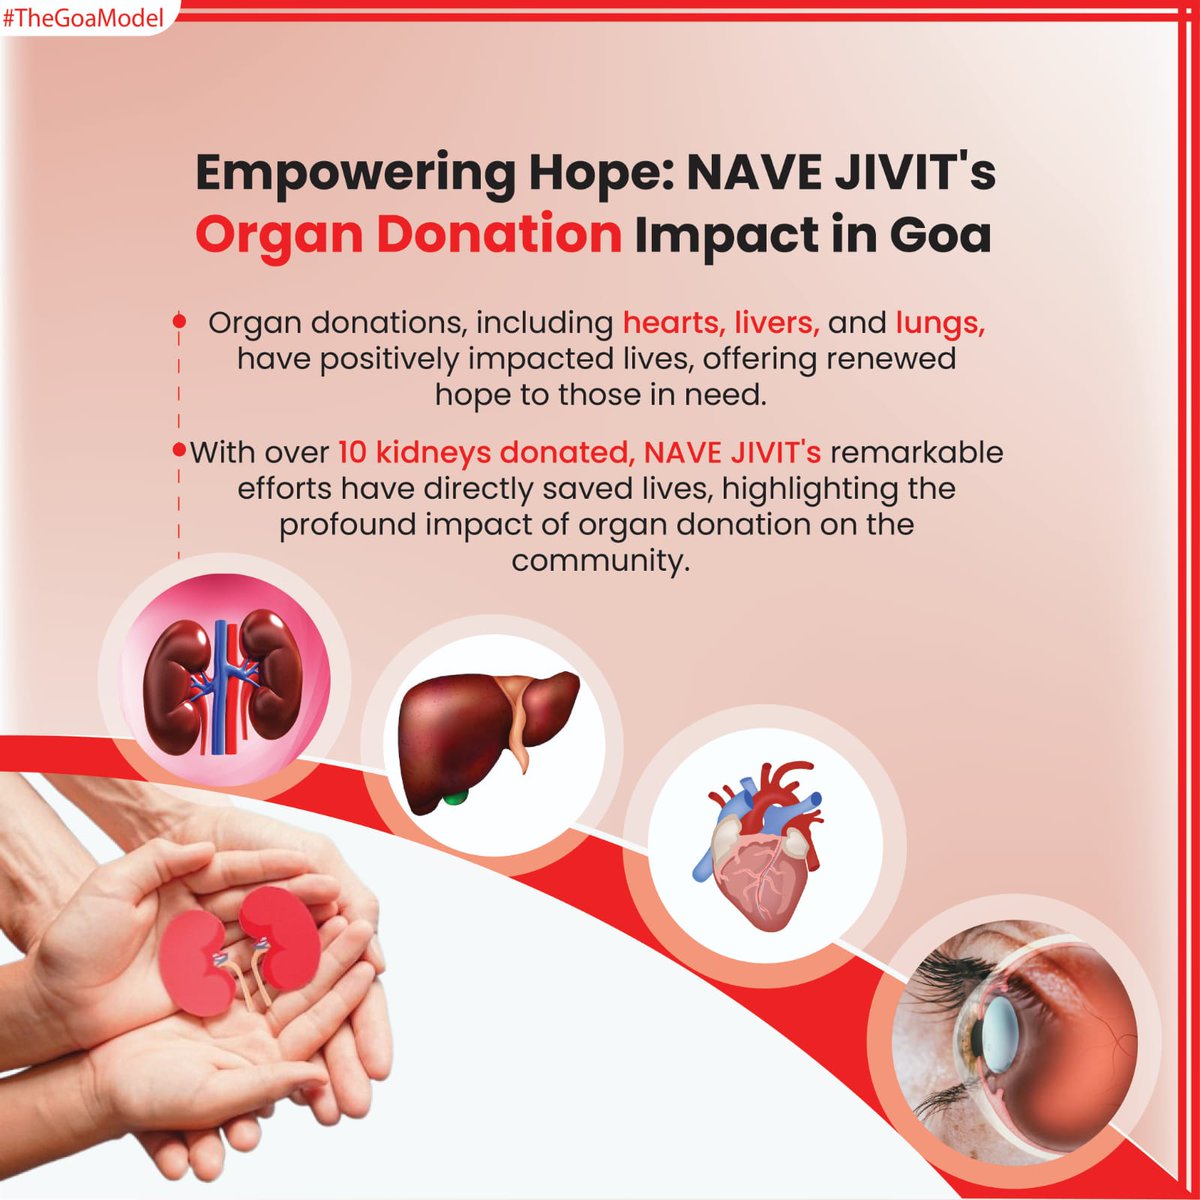 Empowering hope in Goa! NAVE JIVIT's impactful organ donations have transformed lives, offering renewed hope to those in need.
#TheGoaModel
#OrganDonations #TransformingLives #OrganDonationAwareness #GoaHealthcare #SavingLives #HopeForAll #OrganTransplants #DonateLife